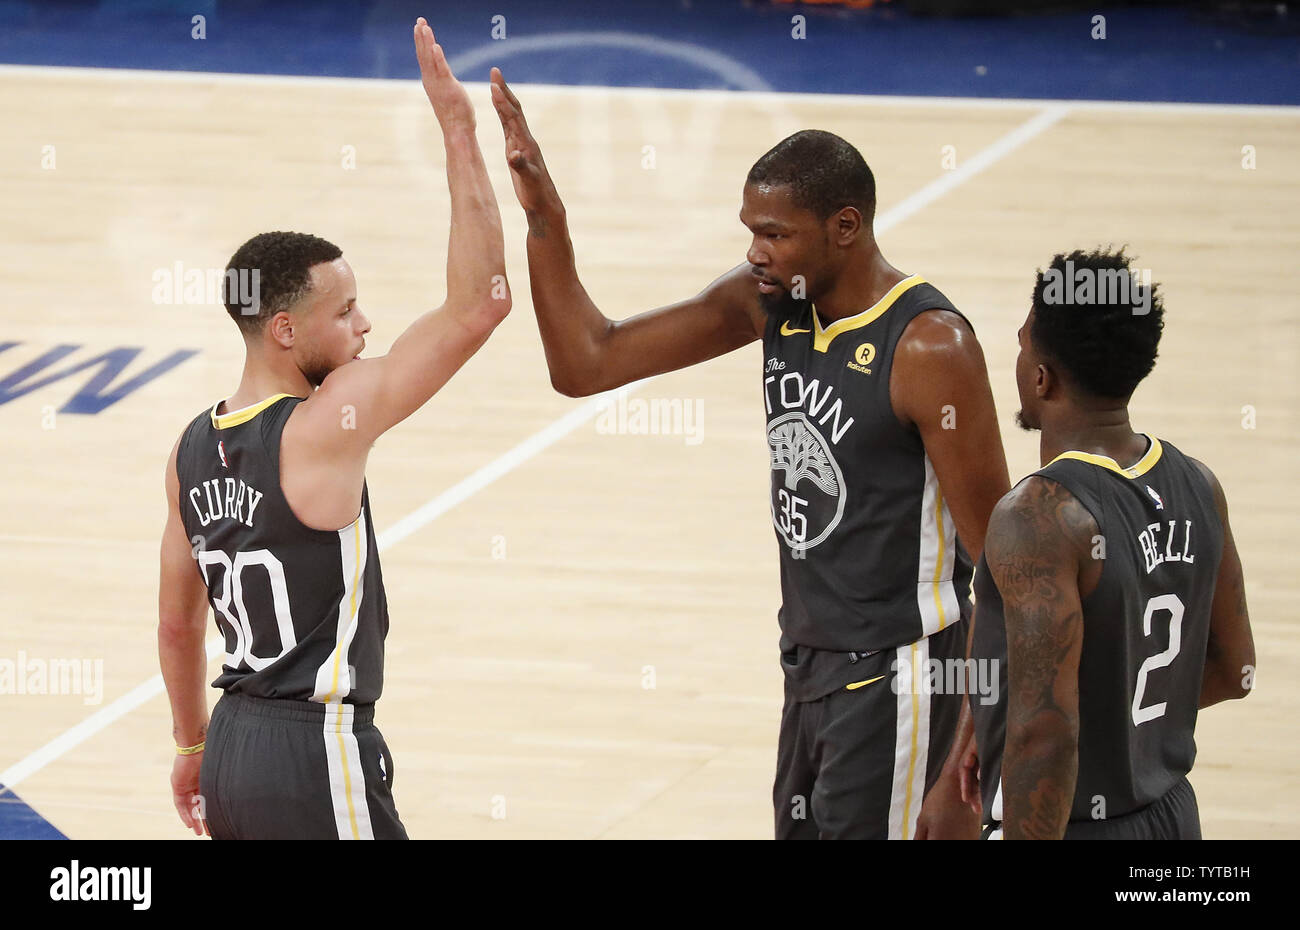 Kevin Durant to Join the Golden State Warriors - The New York Times